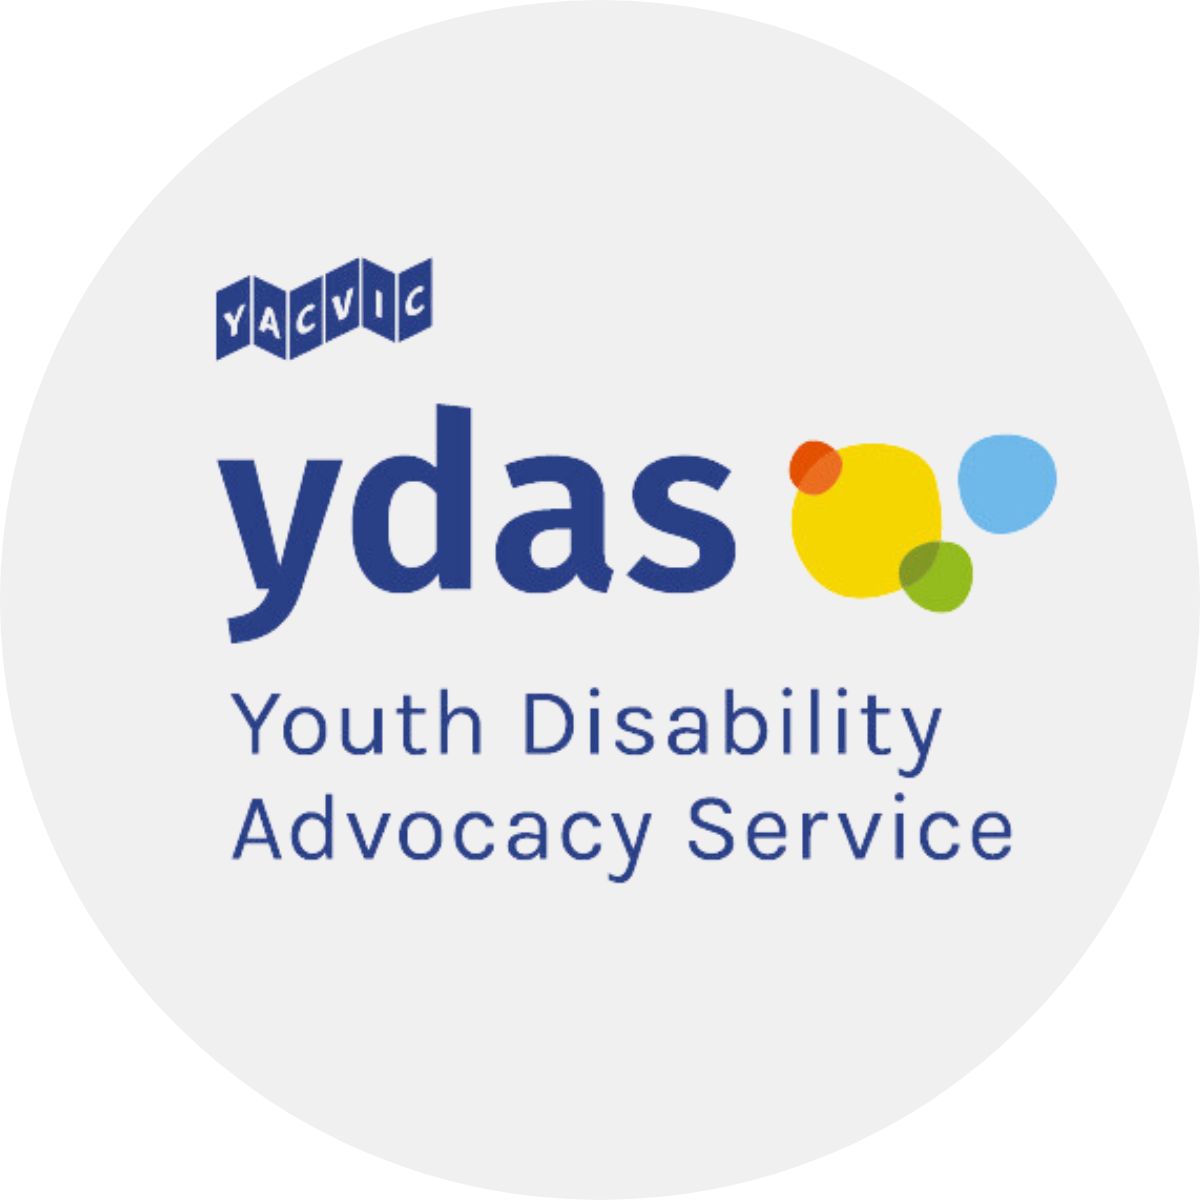 YACVIC Youth Disability Advocacy Service logo with blue text and overlapping coloured blobs.